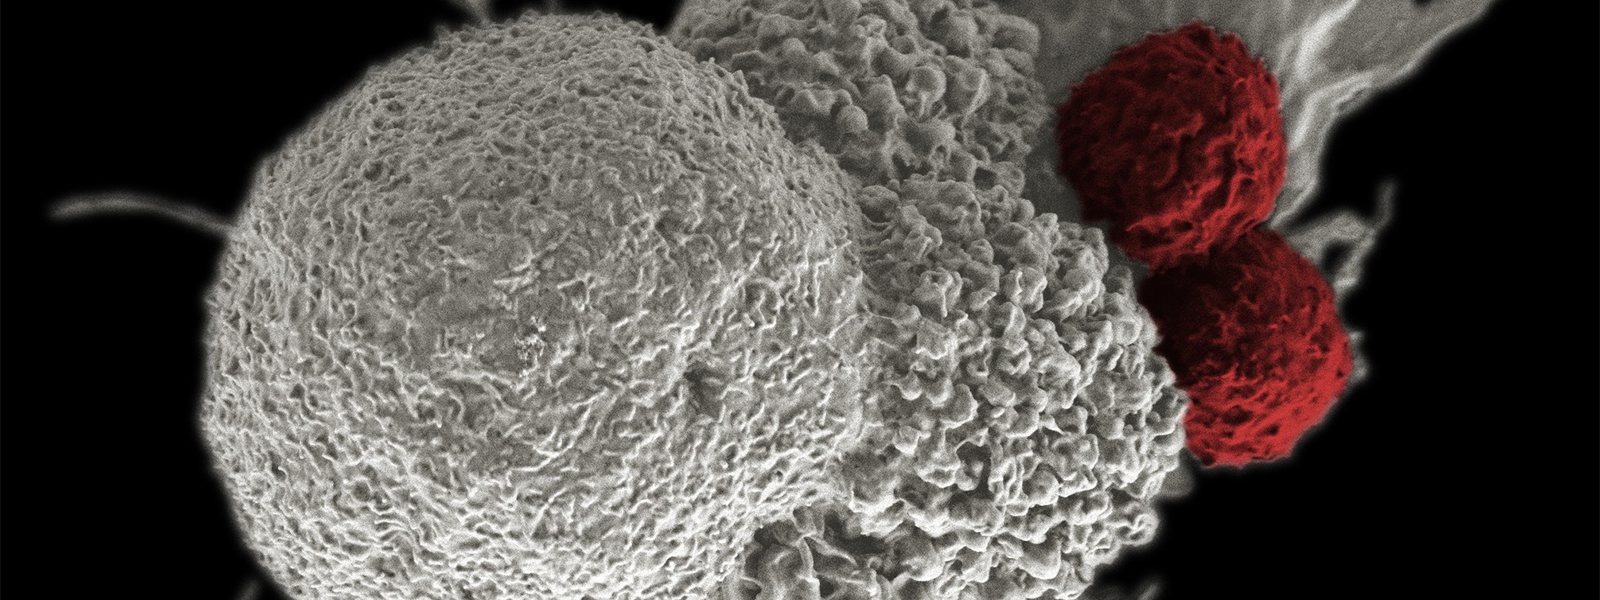 T cells (red) attack an oral squamous cancer cell (white)